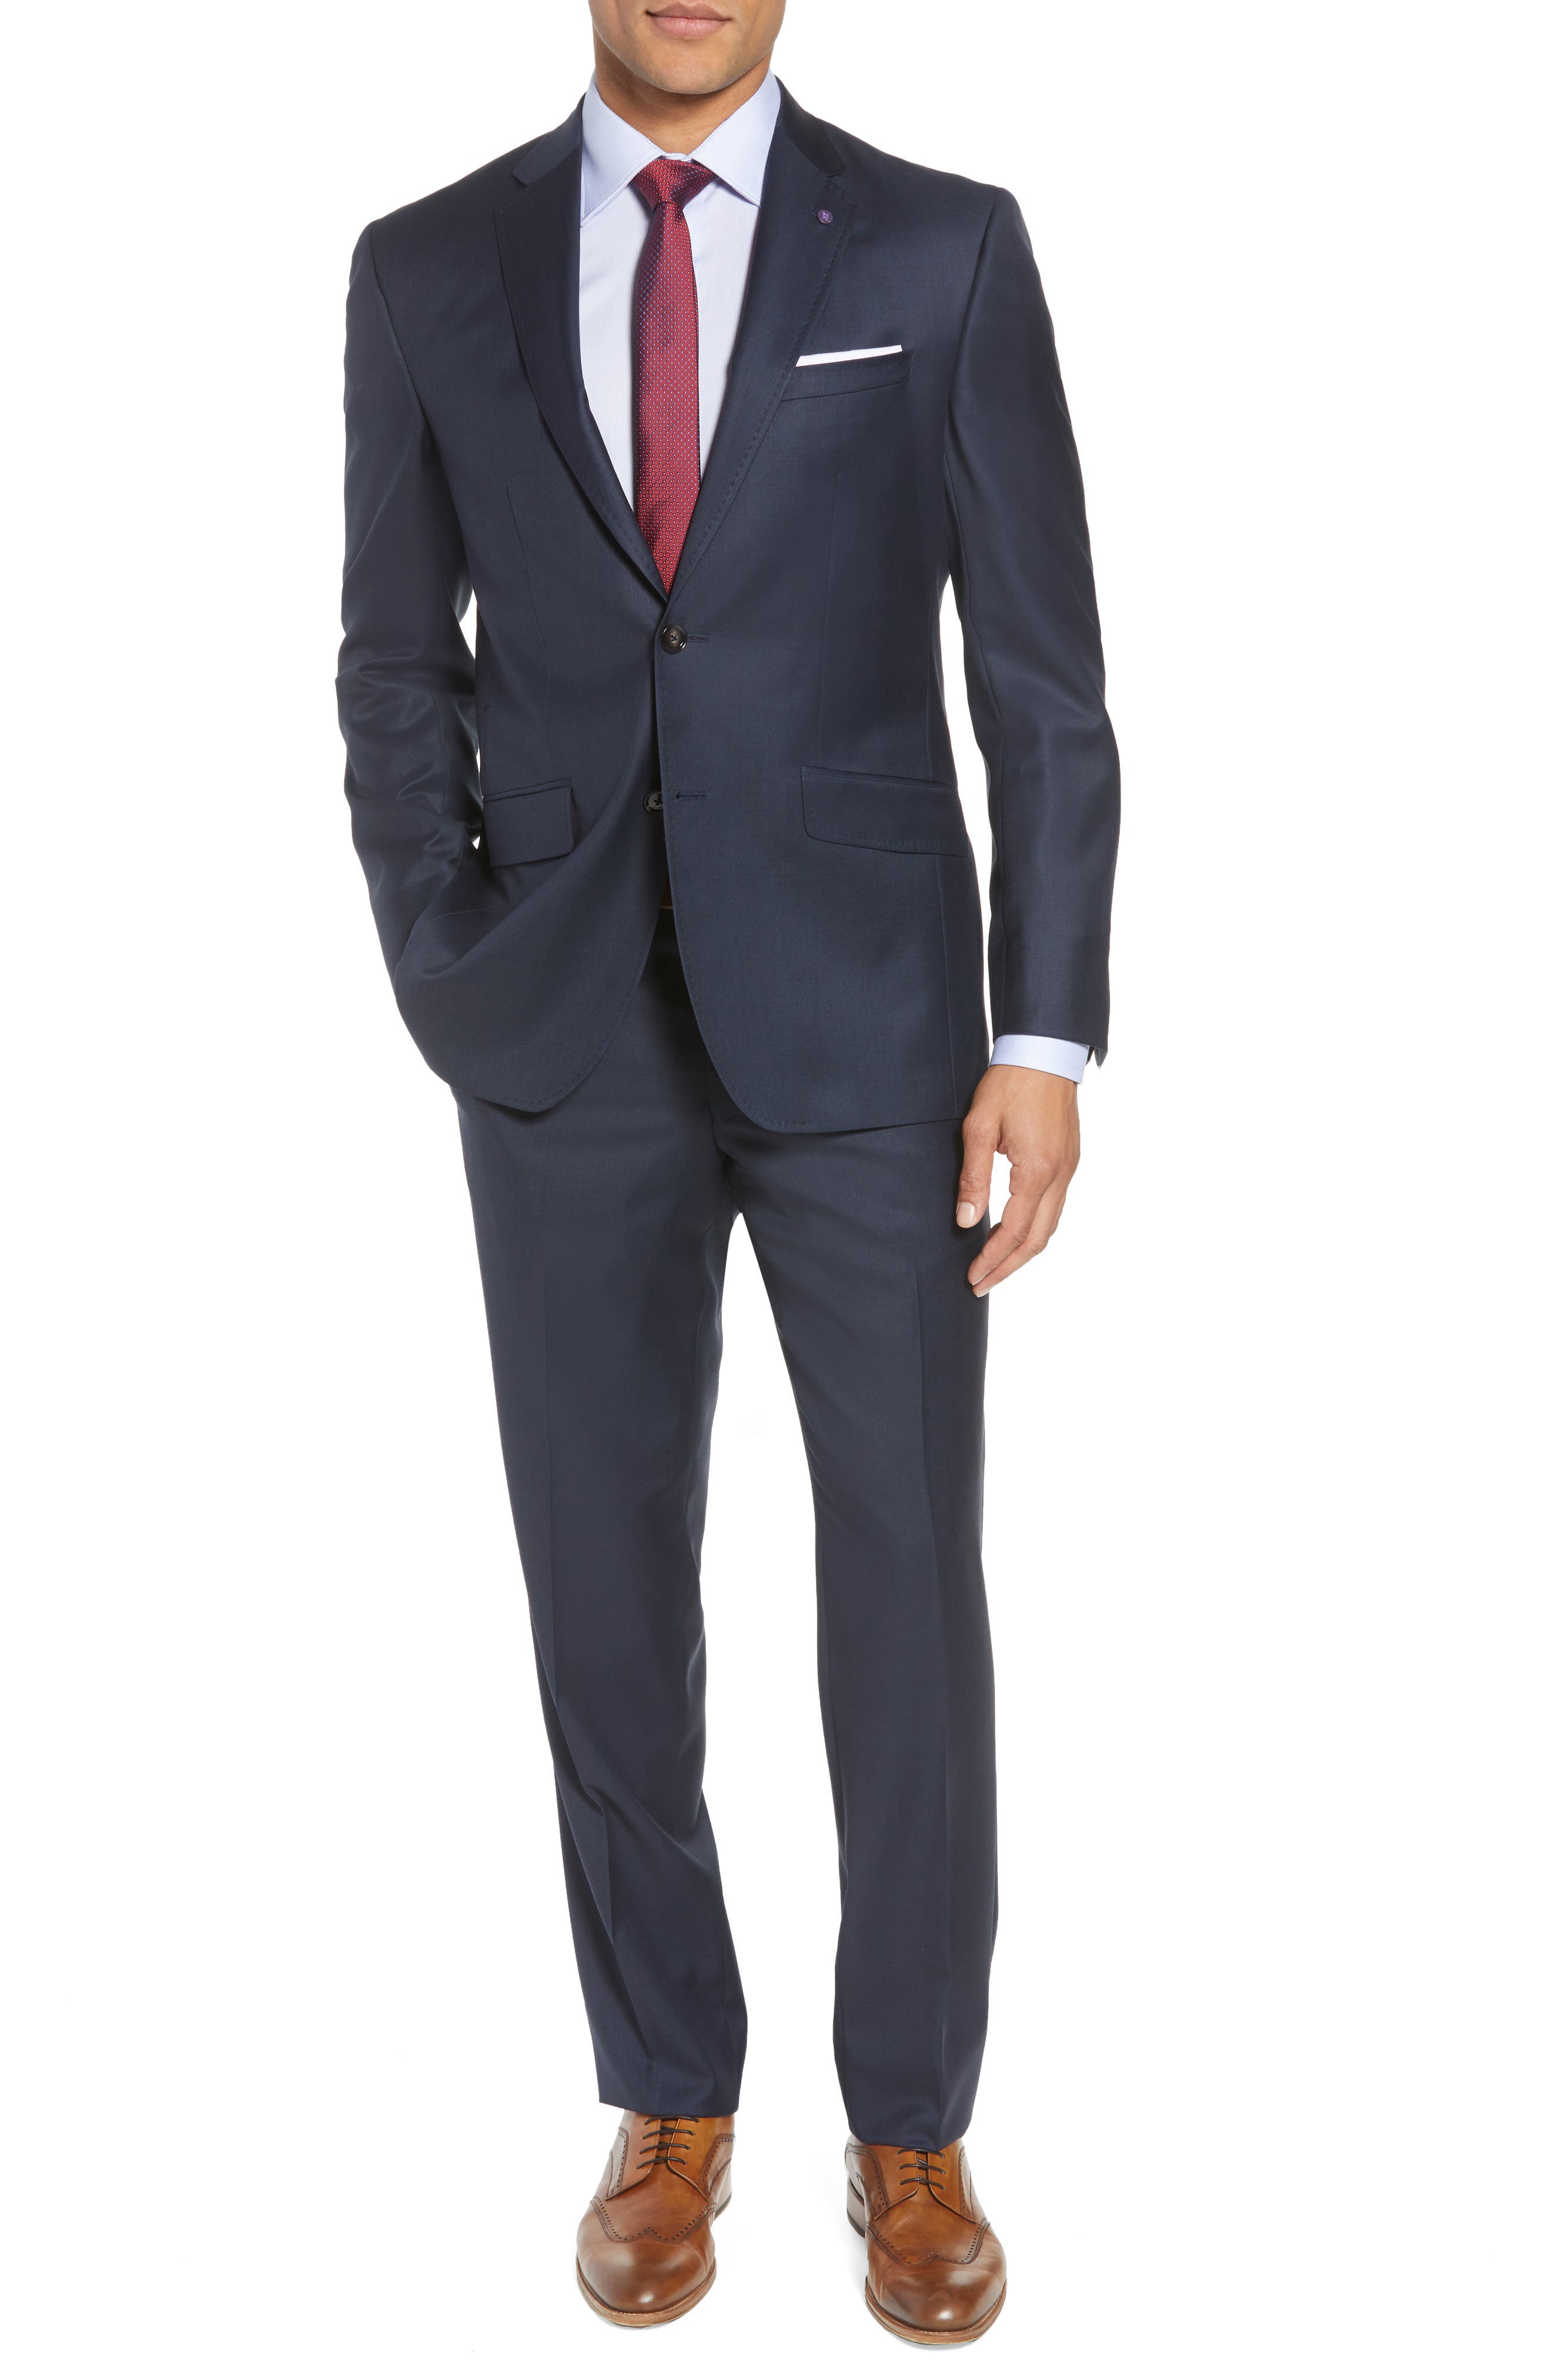 a nice suit Today's Deals - OFF 64%